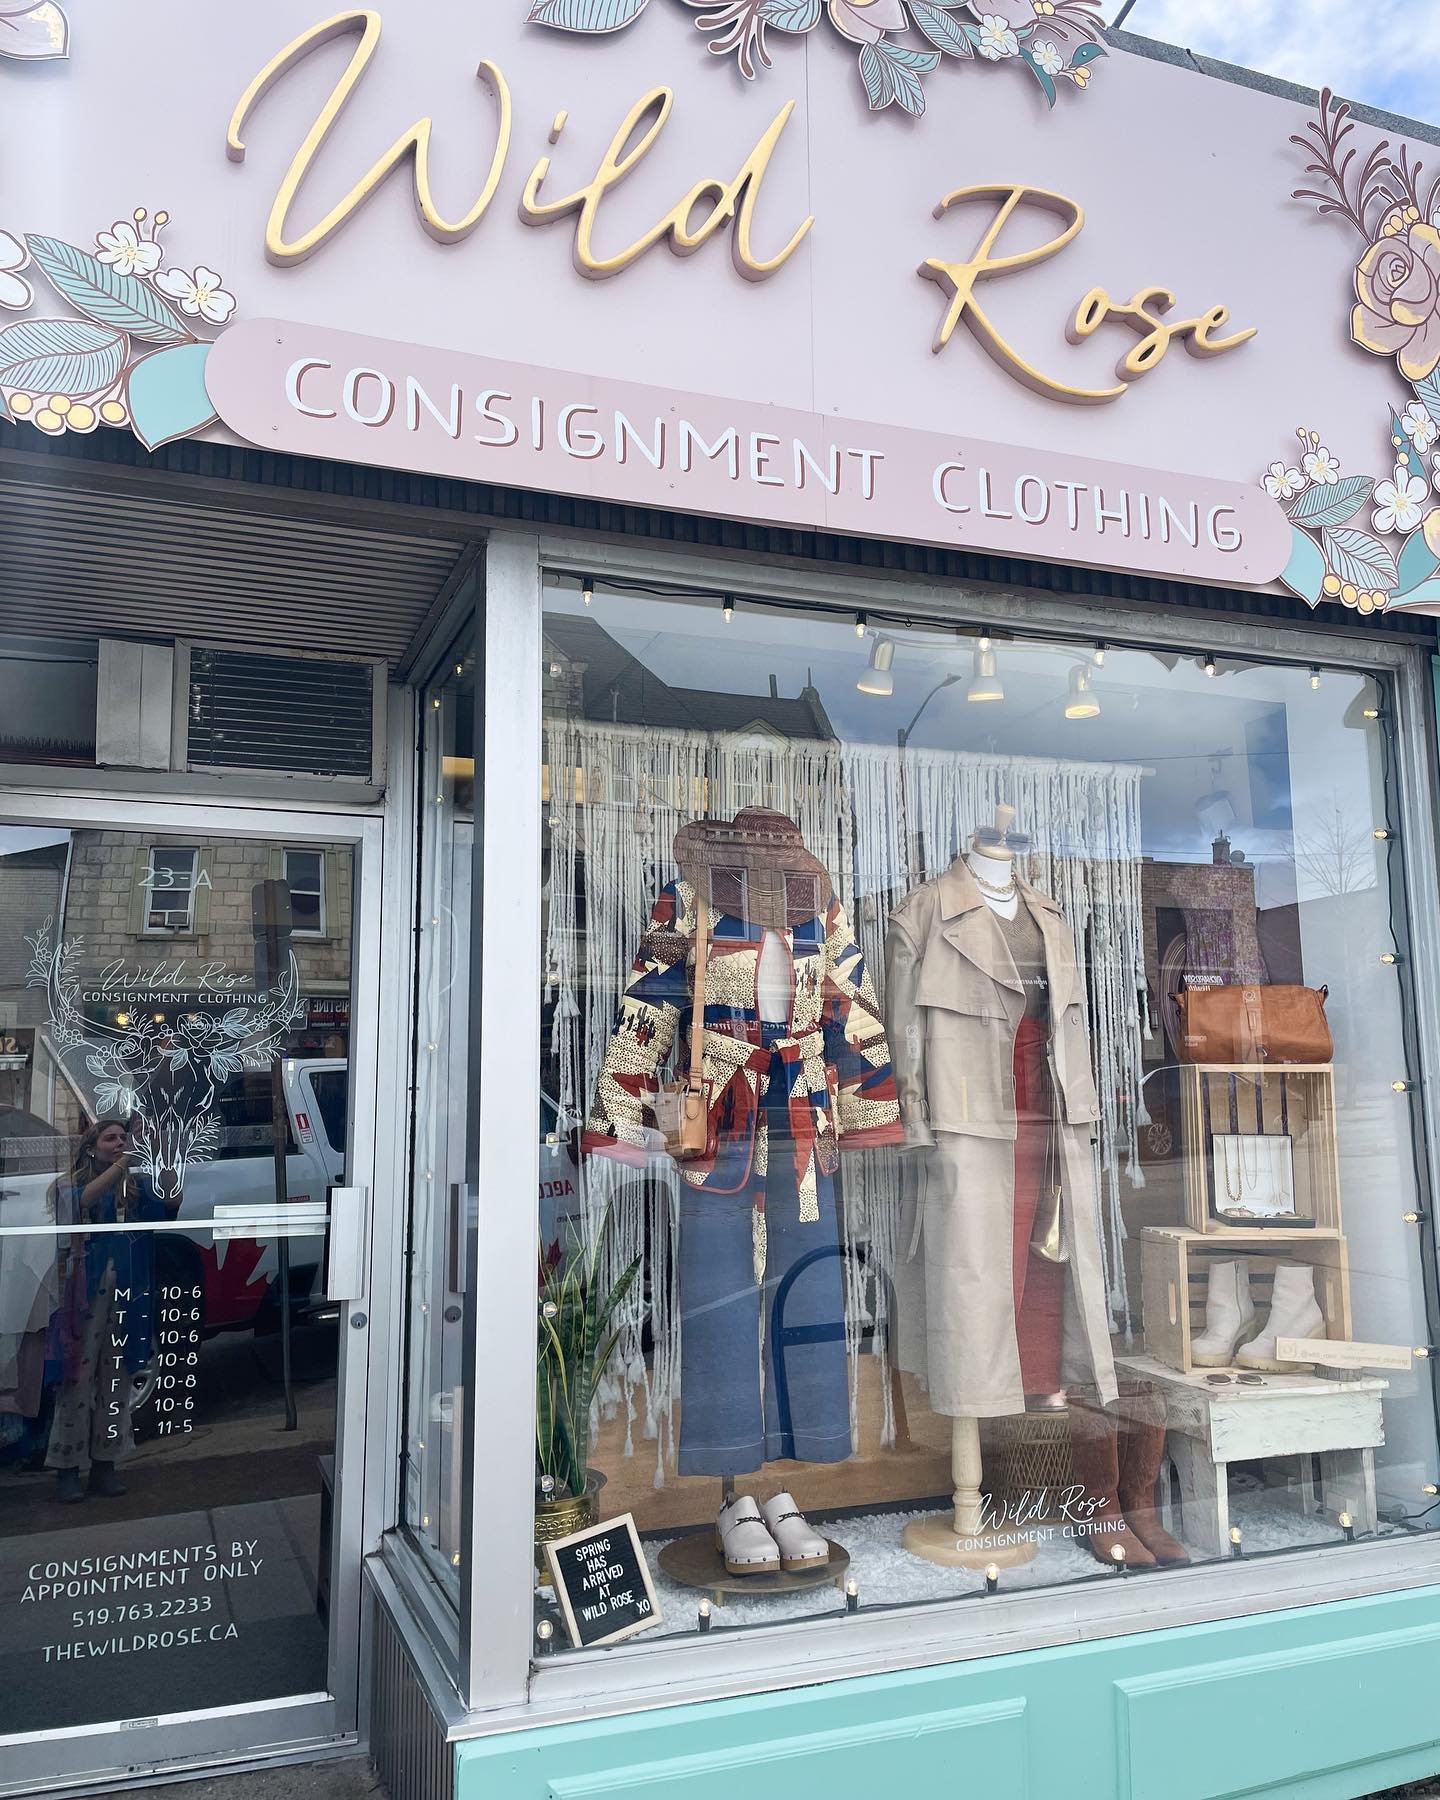 Fresh window 🧡 

#ootd #windowdisplay #shoplocal #downtownguelph #shopsecondhand #wildrosestyle #wildroseconsignment #consignmentboutique